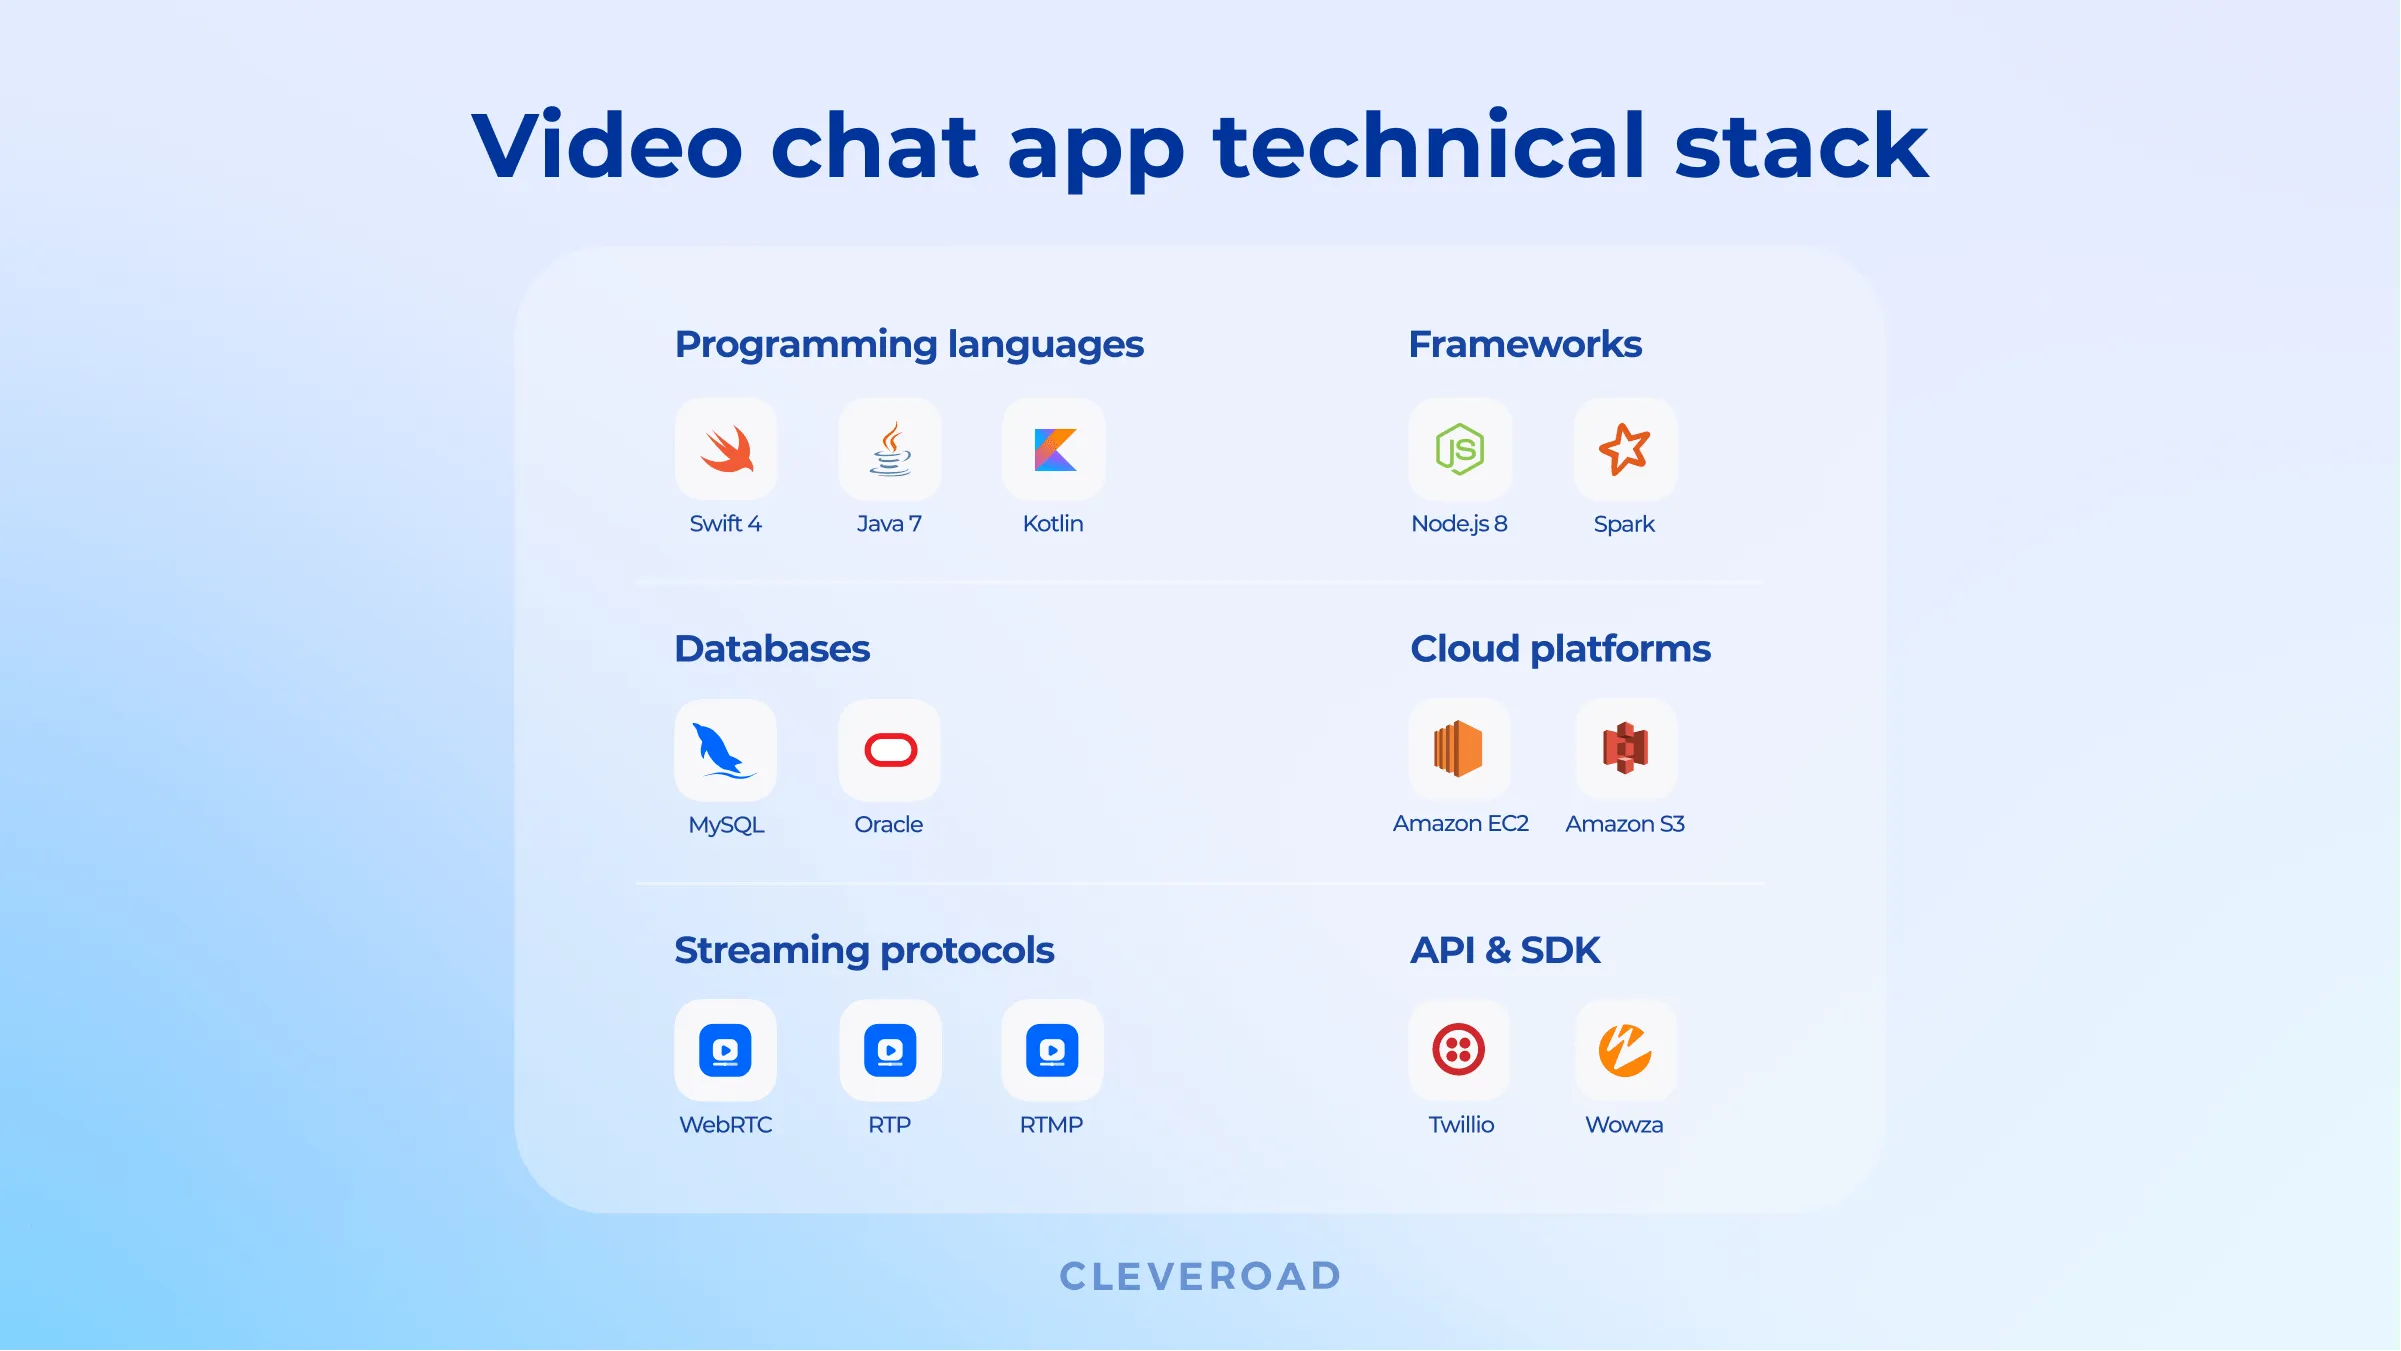 What technologies needed to build a video chat app?